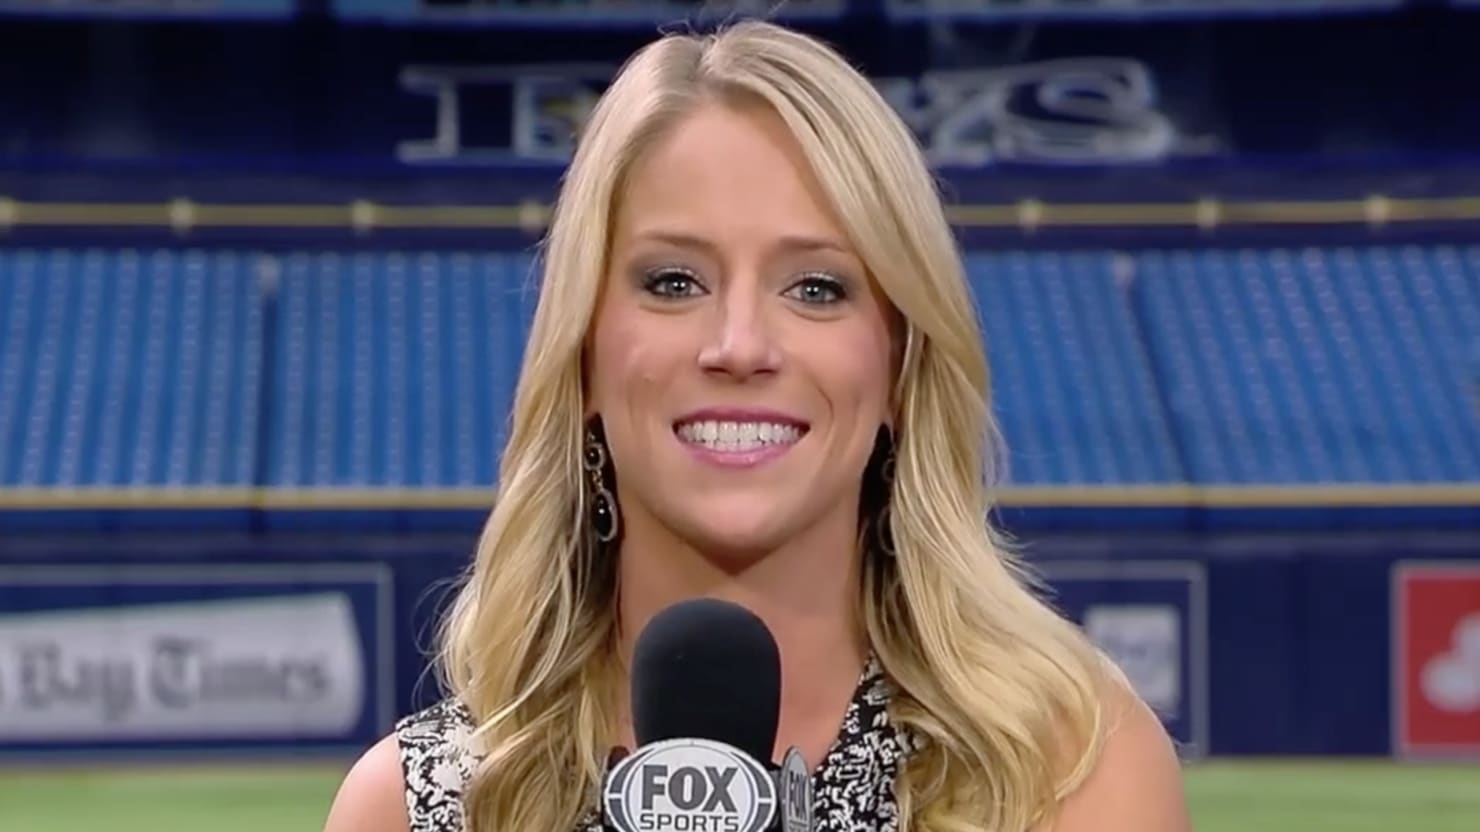 Sports Reporter Fired for Racist Remarks.